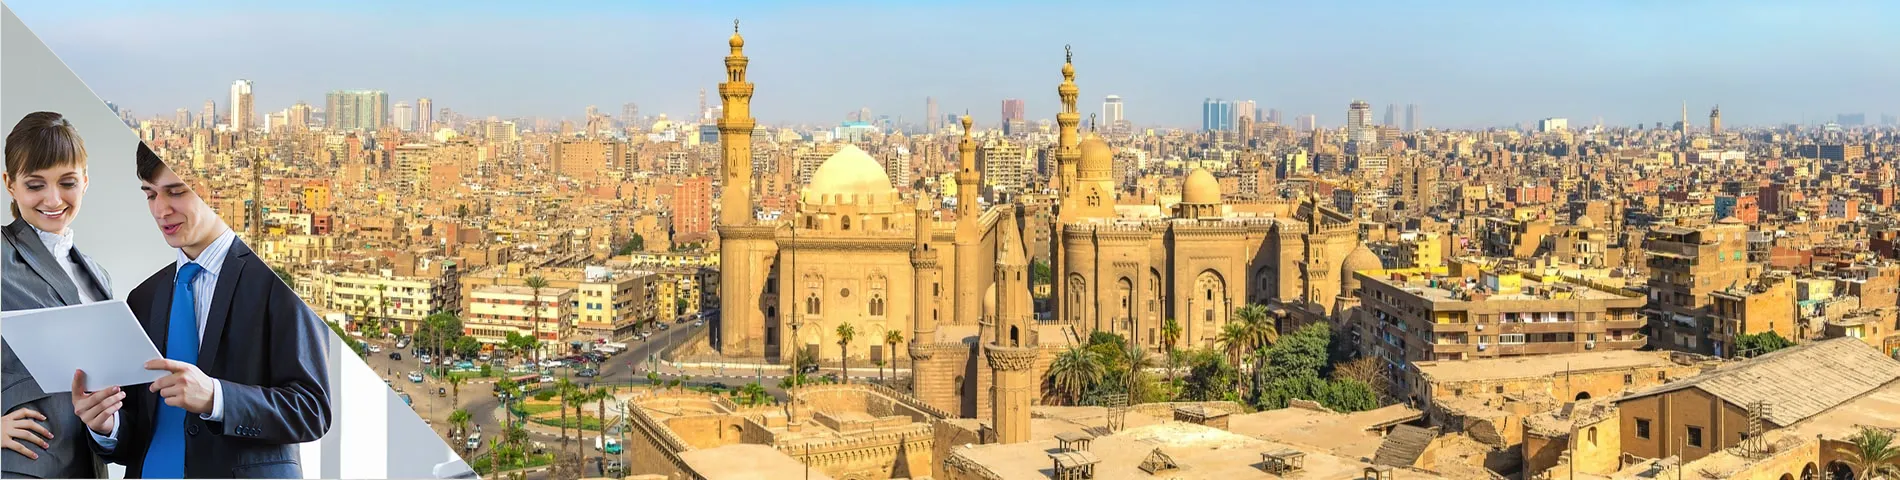 Cairo - Business Individuale